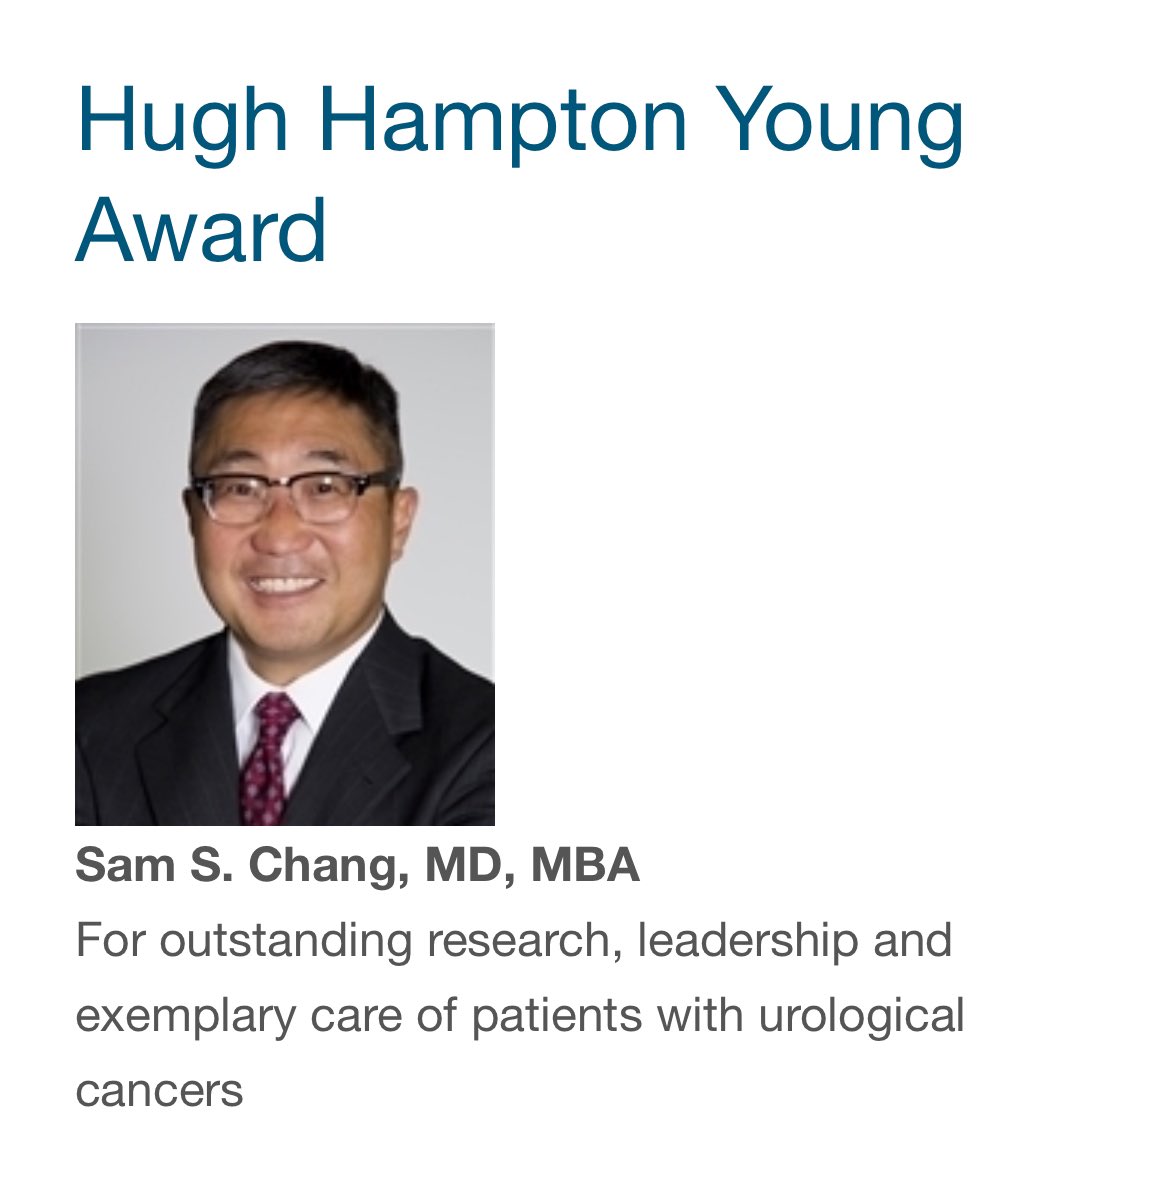 An absolute 🌟🌟🌟 lineup of urologists honored for incredible work, including the one & only, most deserving, @UroCancerMD! Dr. Chang is a phenomenal surgeon, clinician, researcher, teacher, mentor, sponsor & leader. But above all, just one of the best darn people ever 🫶🏽♥️🤩